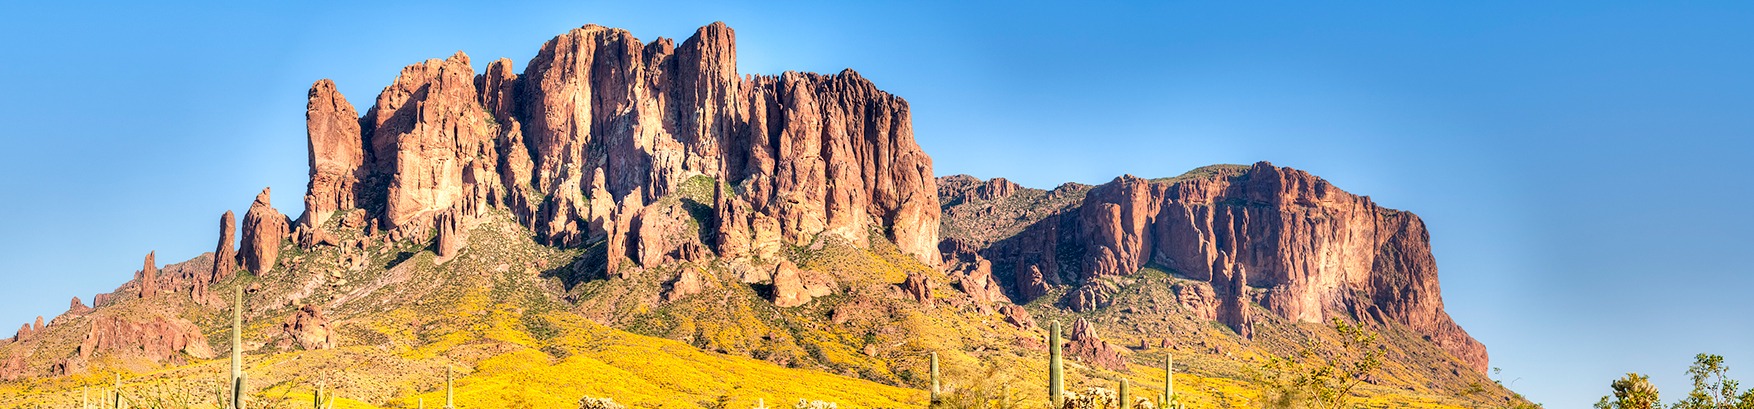 Mountain range in Arizona, a state where personal injury attorney Super Woman Super Lawyer can help